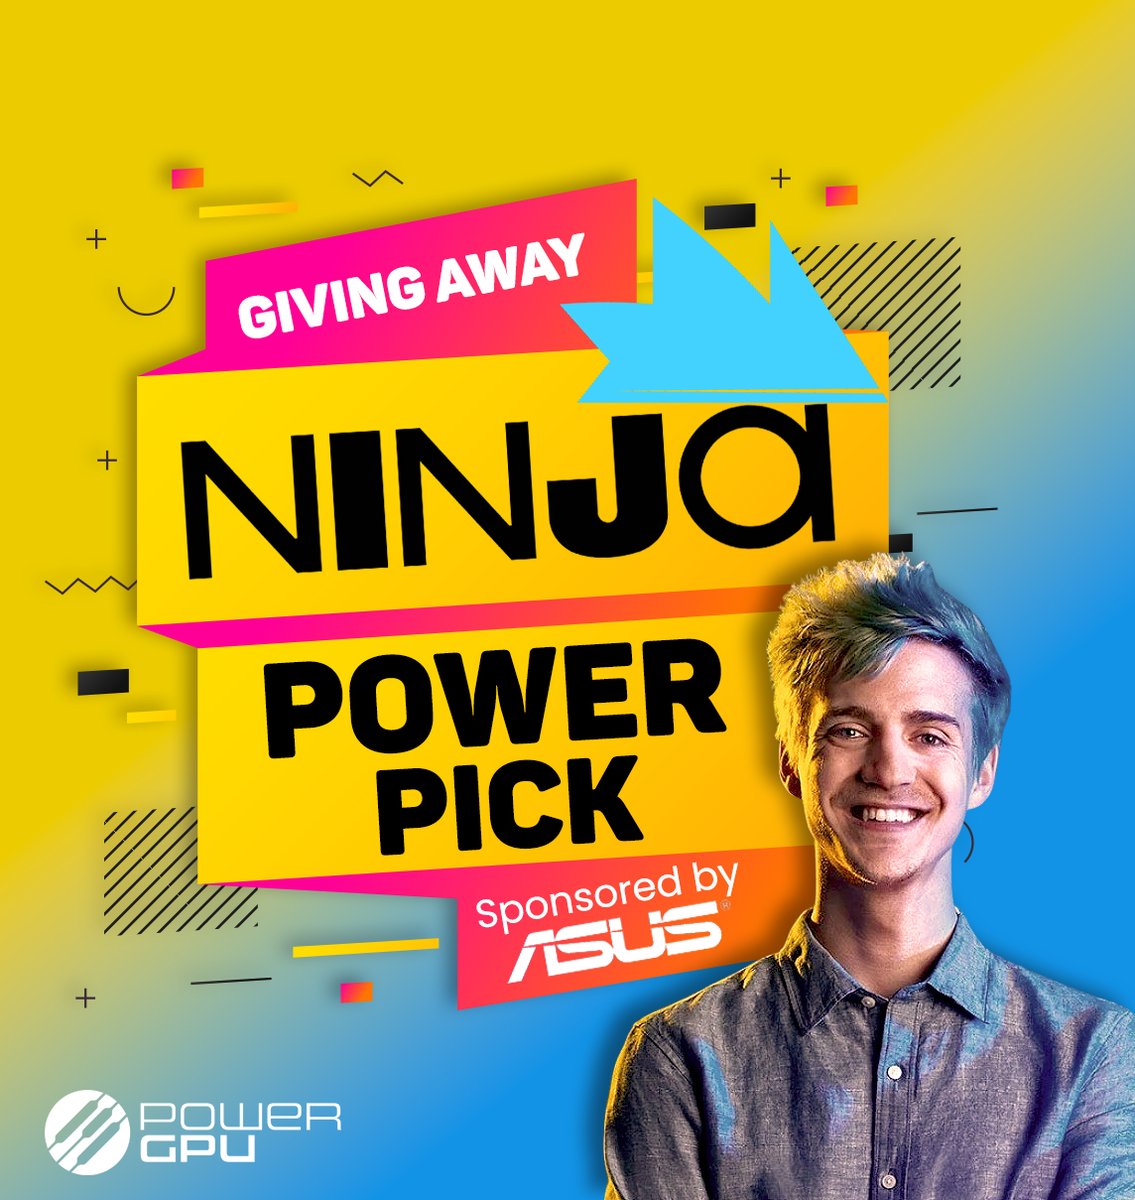 📢GIVEAWAY📢 Together with @ASUS_ROGNA and @Ninja we are giving away a PC! To Enter: gleam.io/QLy7l/asus-x-n… ✅Follow ASUS, Ninja, and Us ✅Retweet the Tweet ✅ Tag a Friend